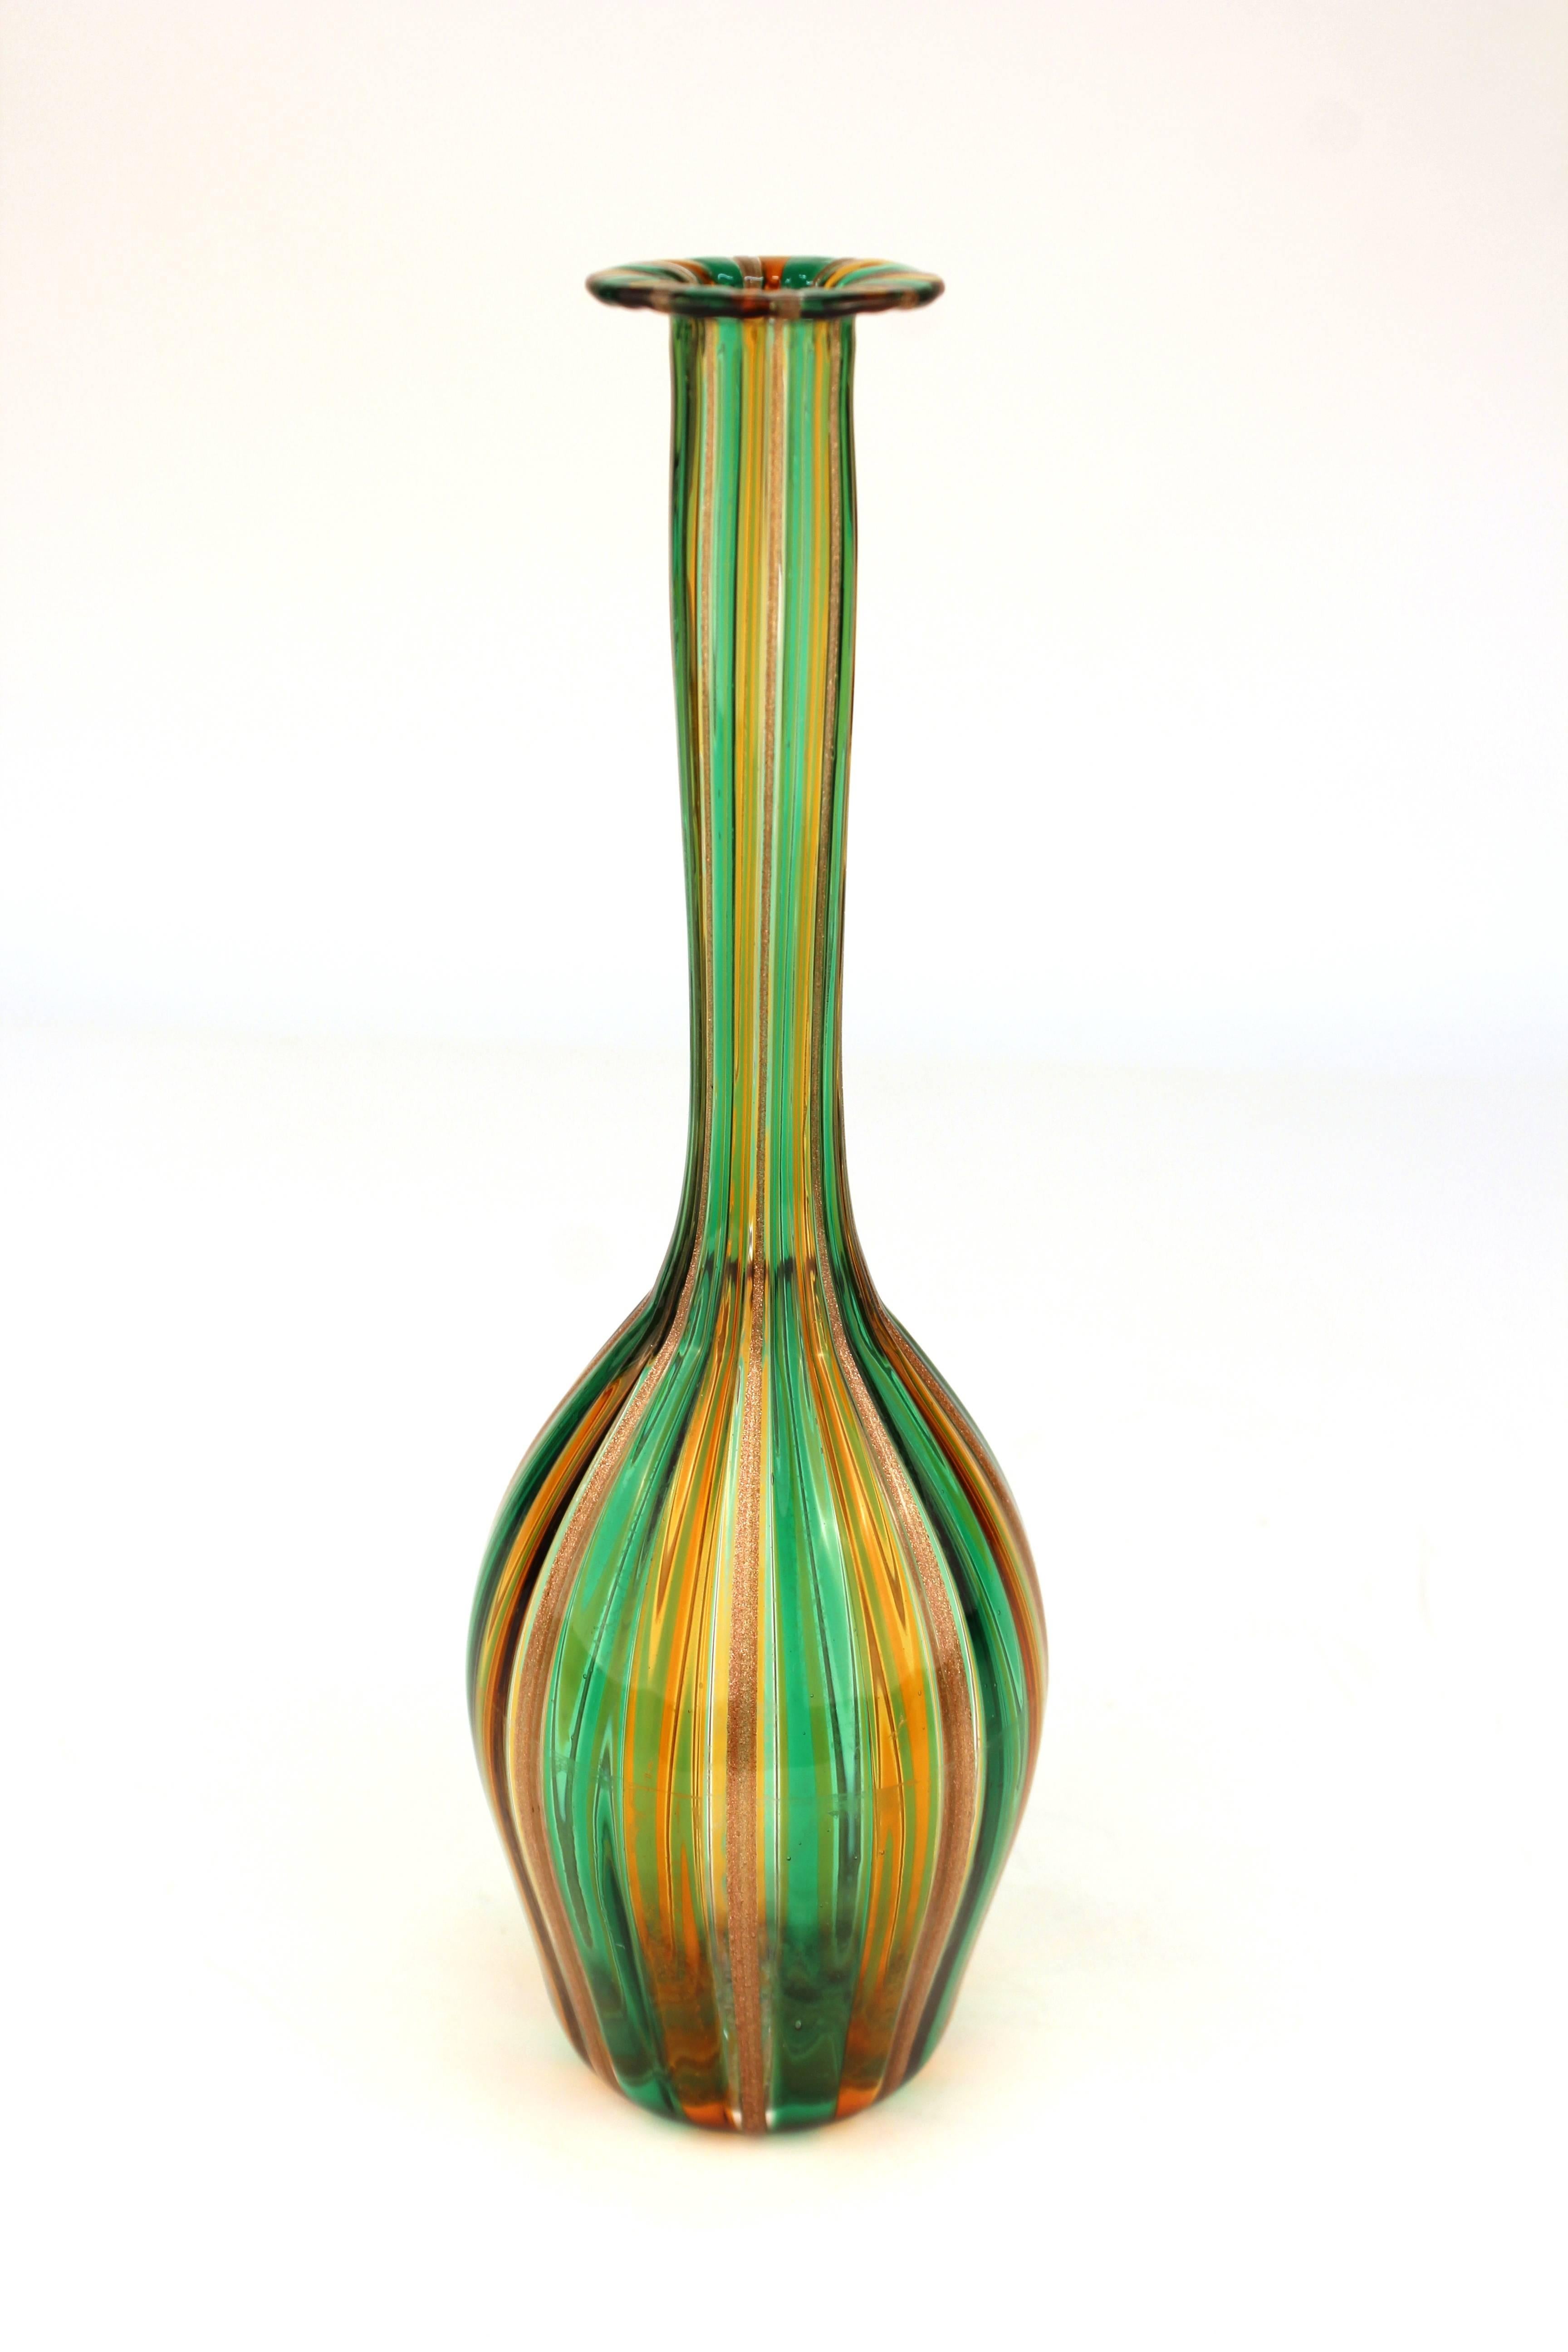 Mid-Century Modern Italian Murano long-necked glass vase with low-relief ribboning stripes in emerald green, amber and gold dust. In good vintage condition.